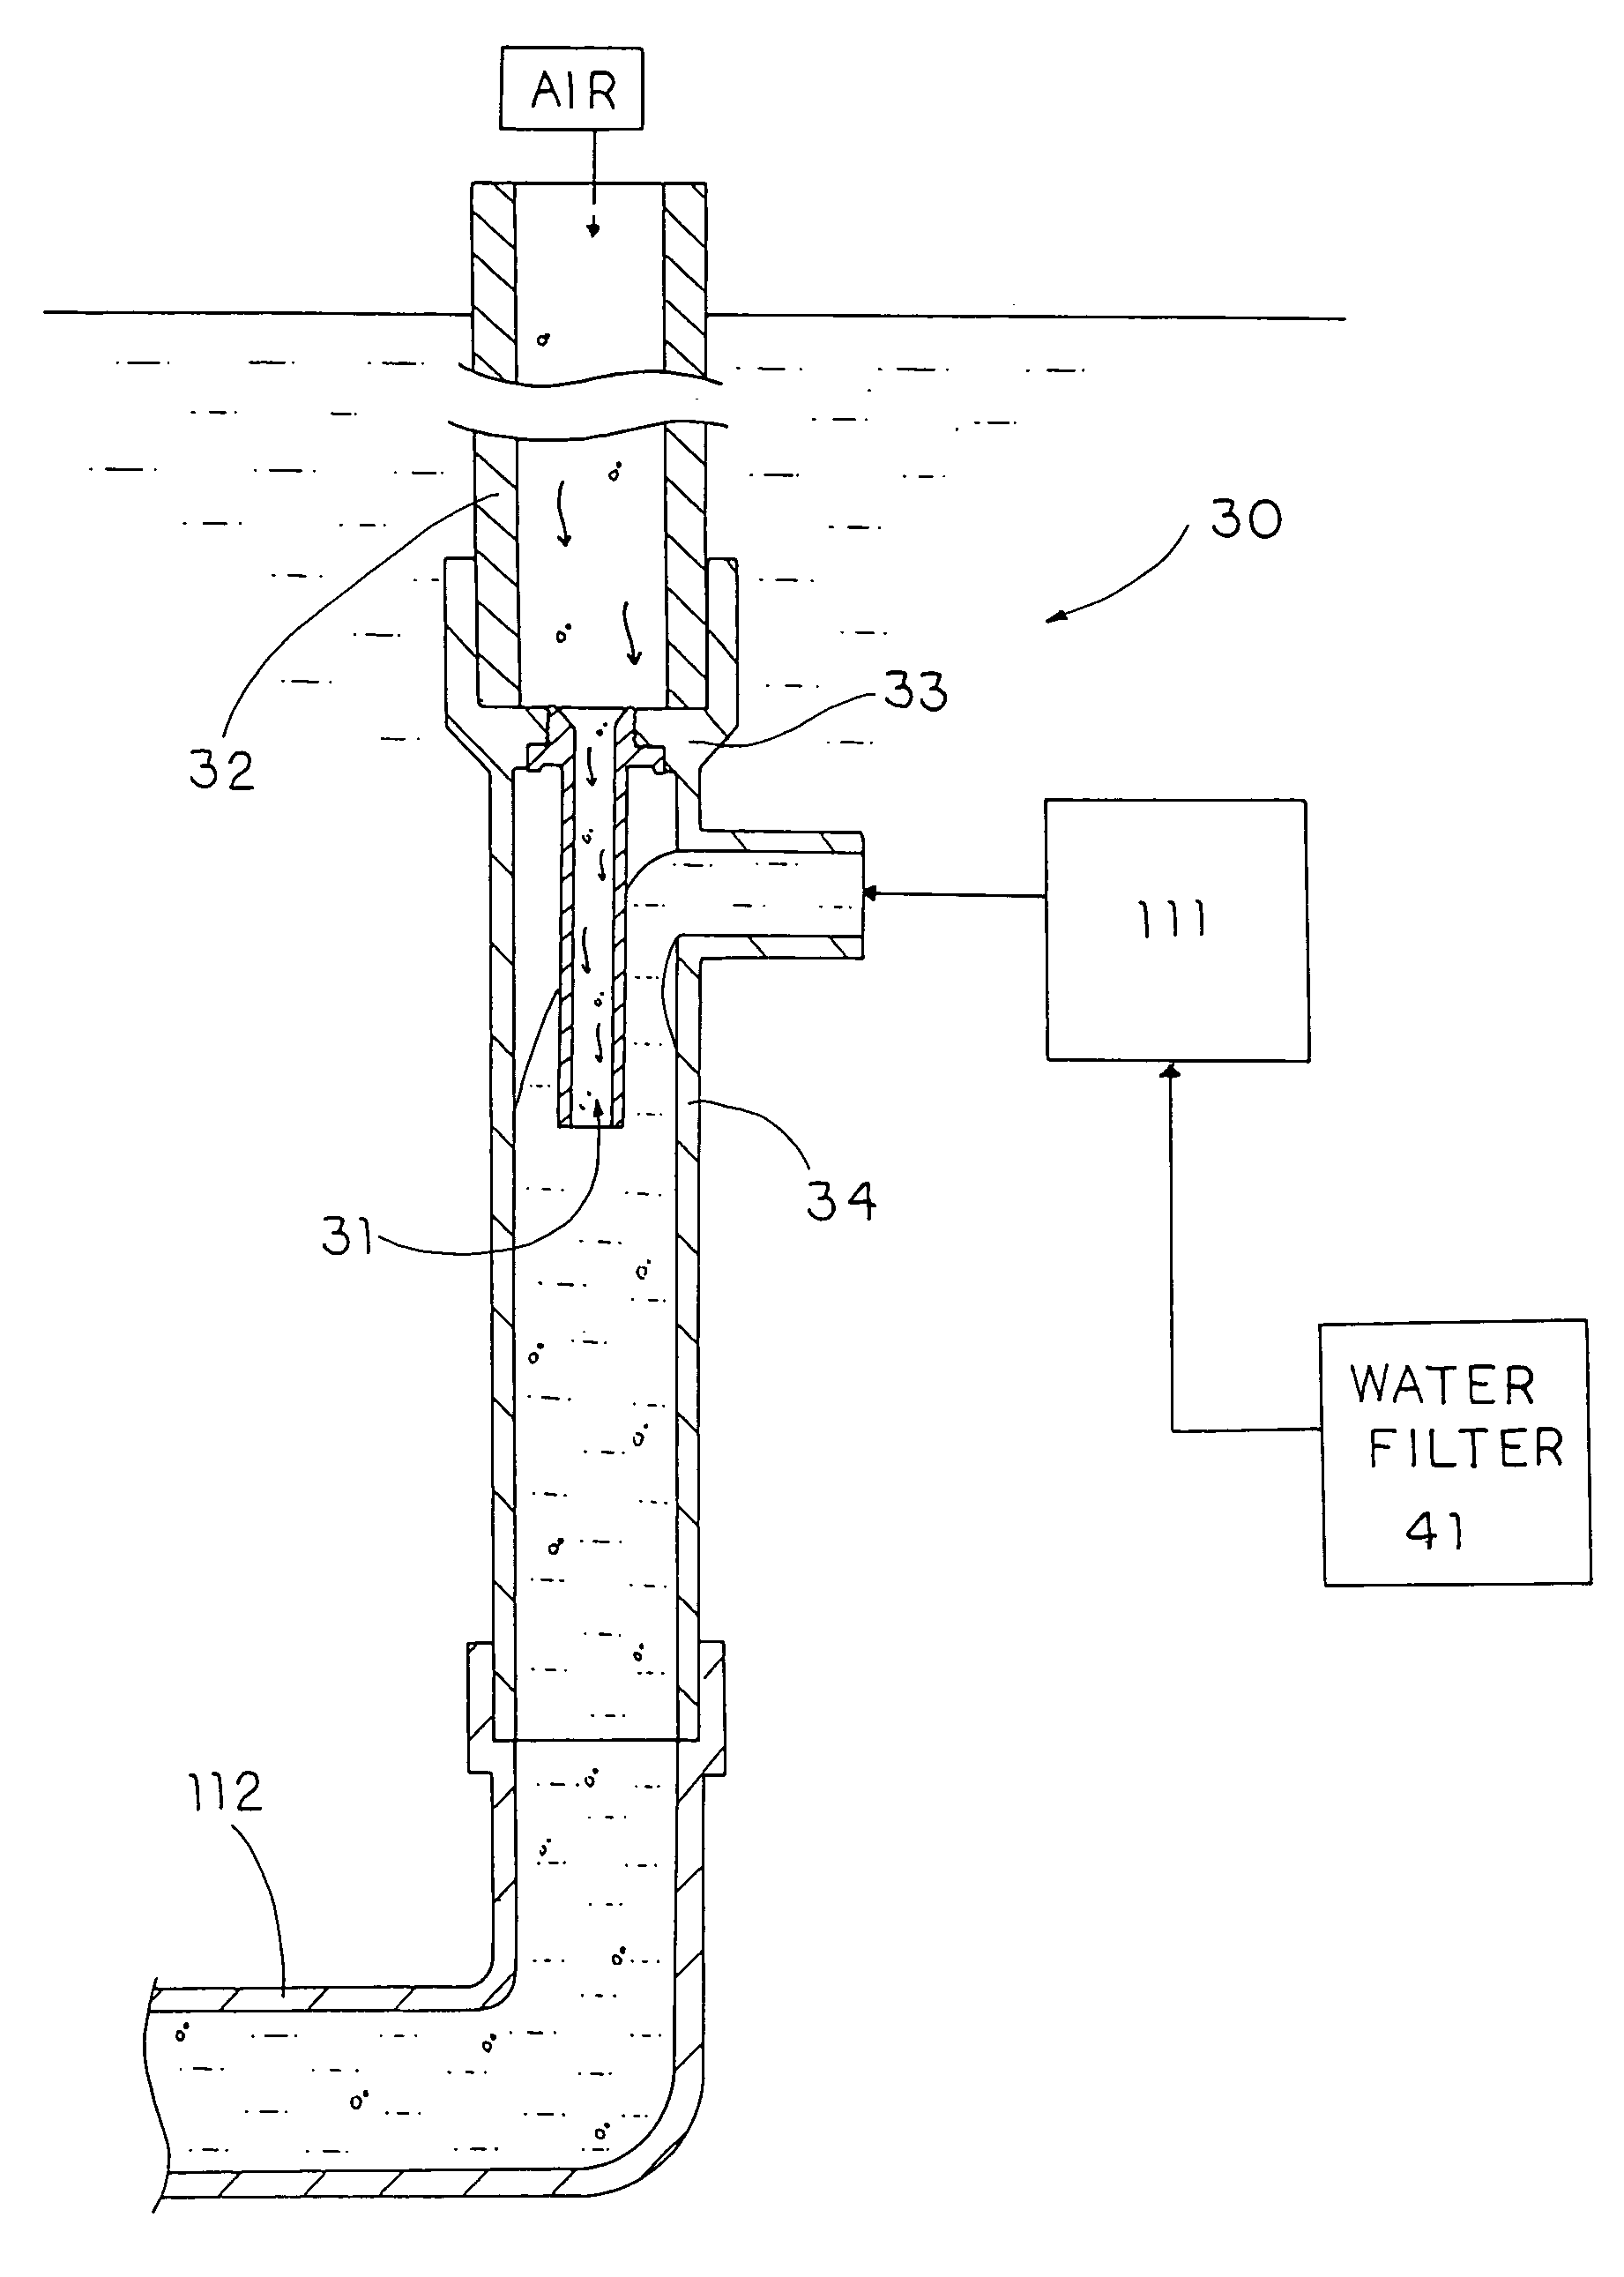 Water treatment system for water animal feeding facility